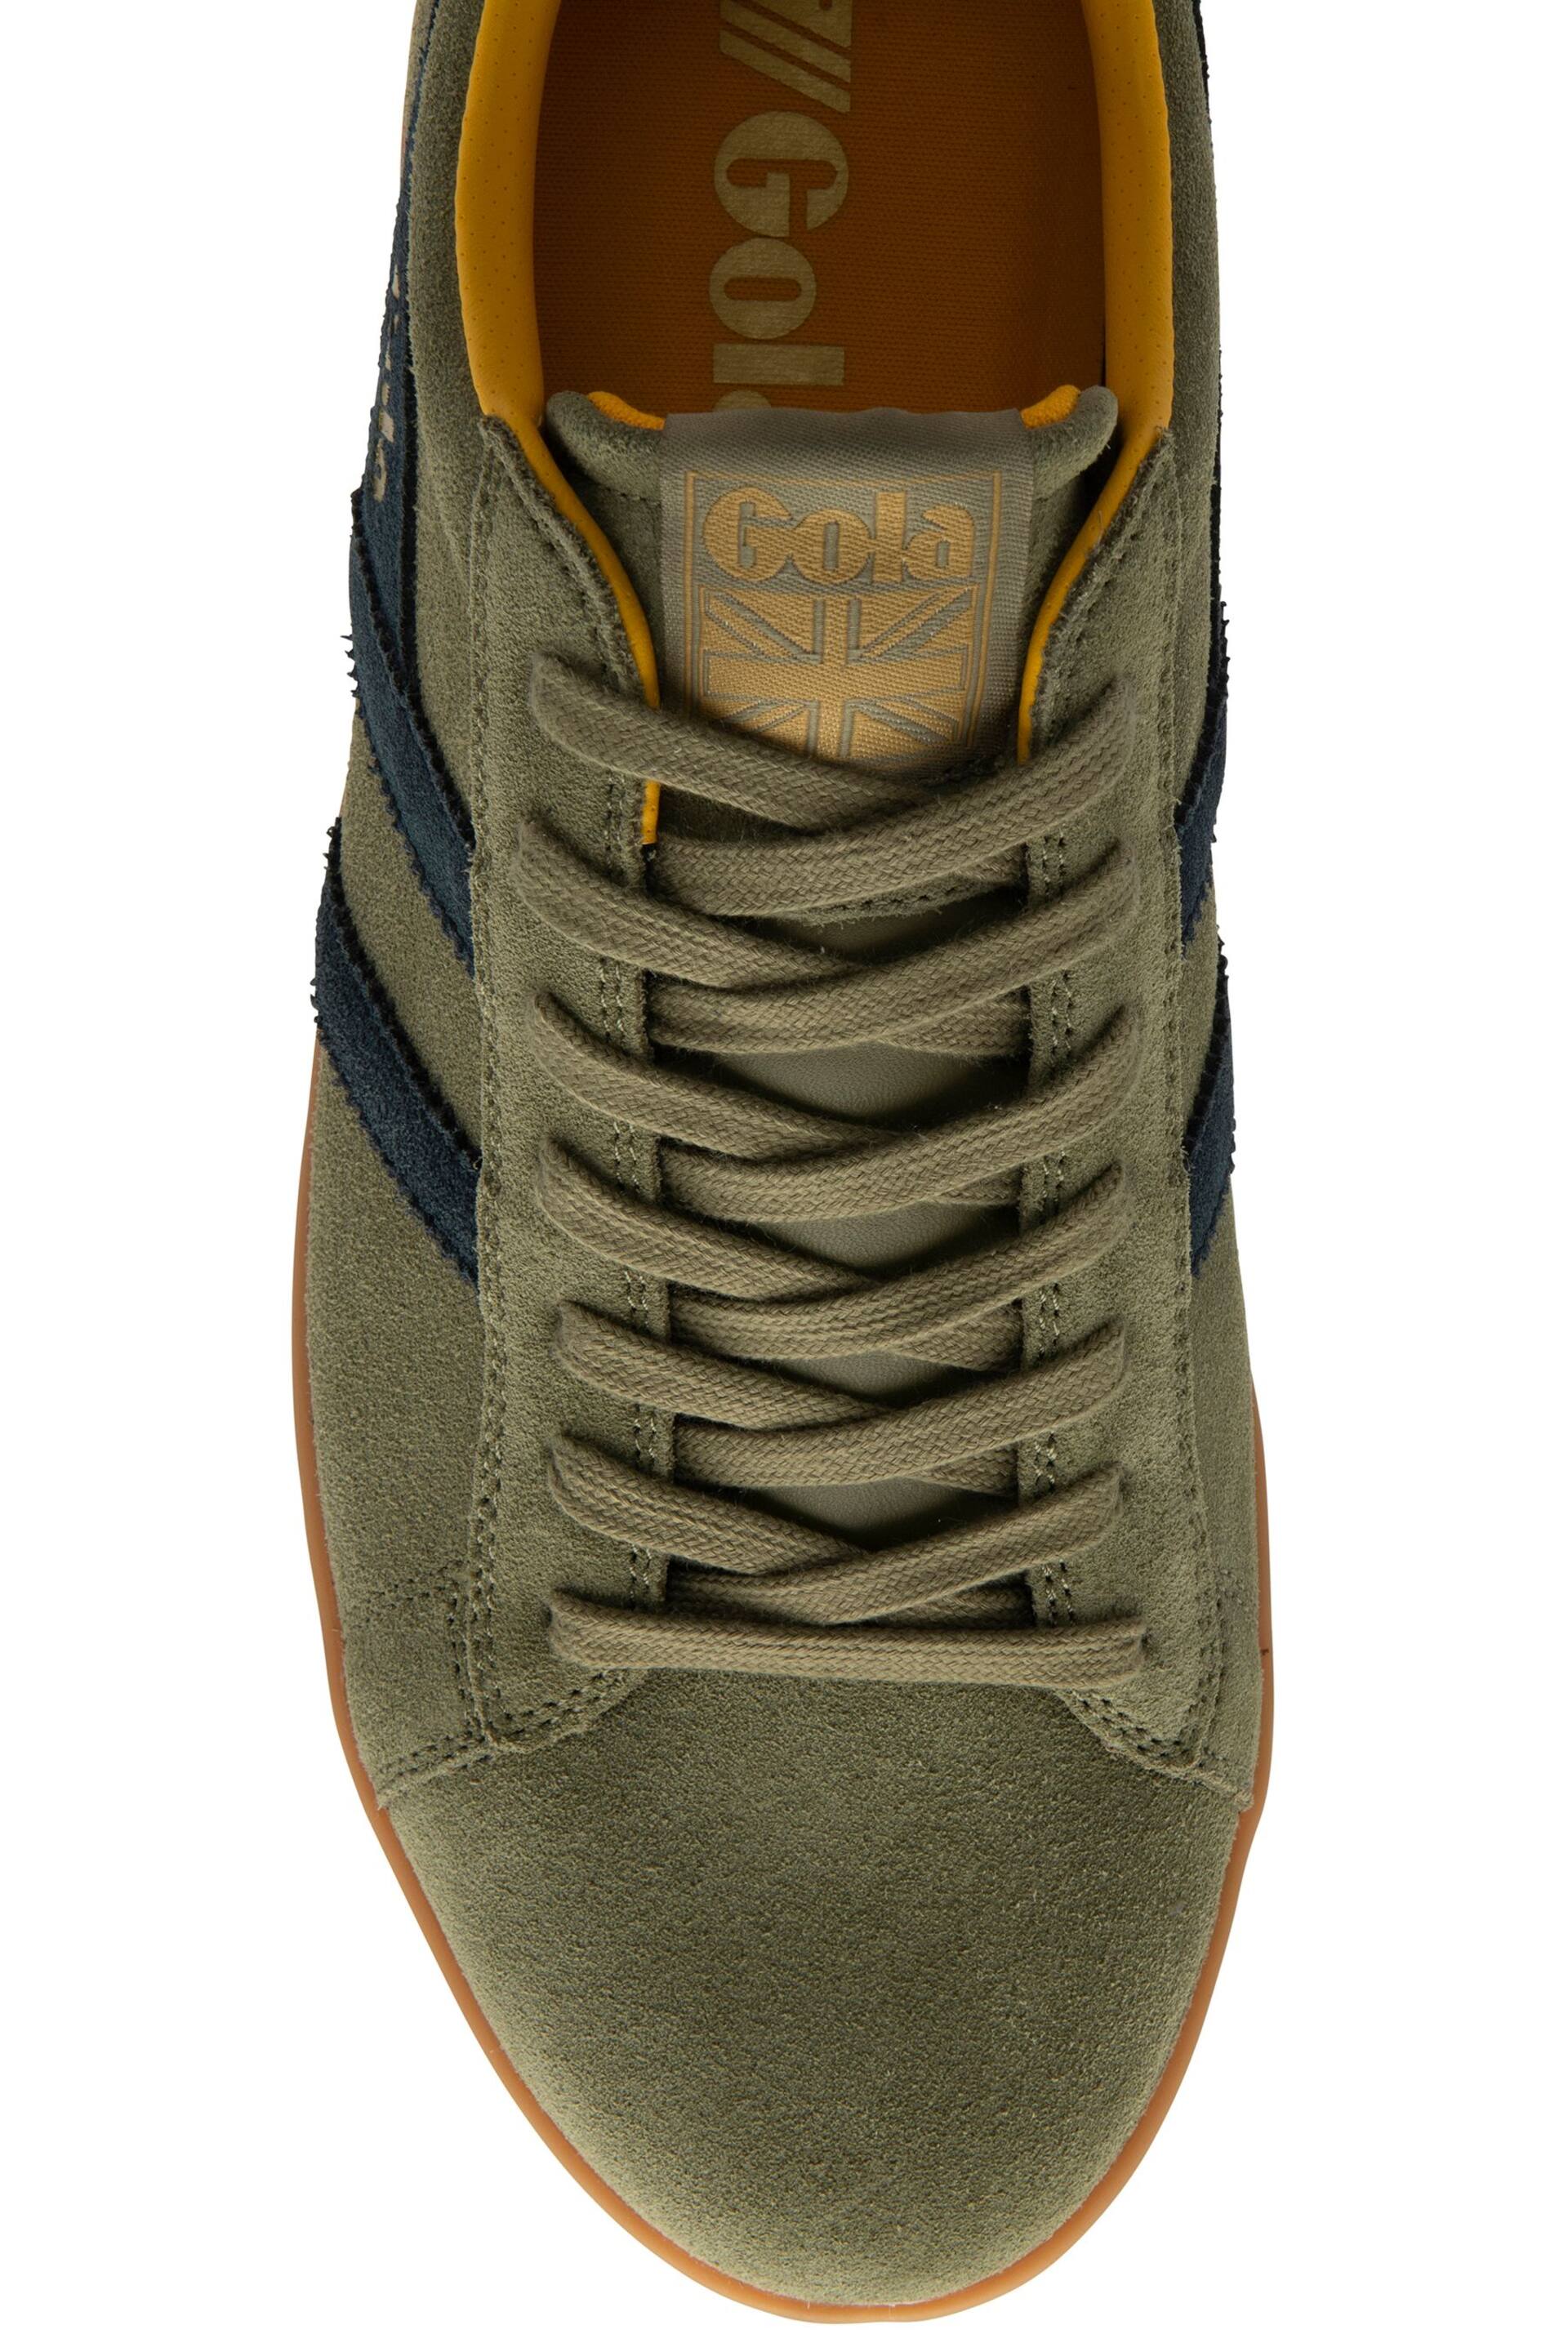 Gola Khaki/Navy/Sun Men's Equipe II Leather Lace-Up Trainers - Image 3 of 4